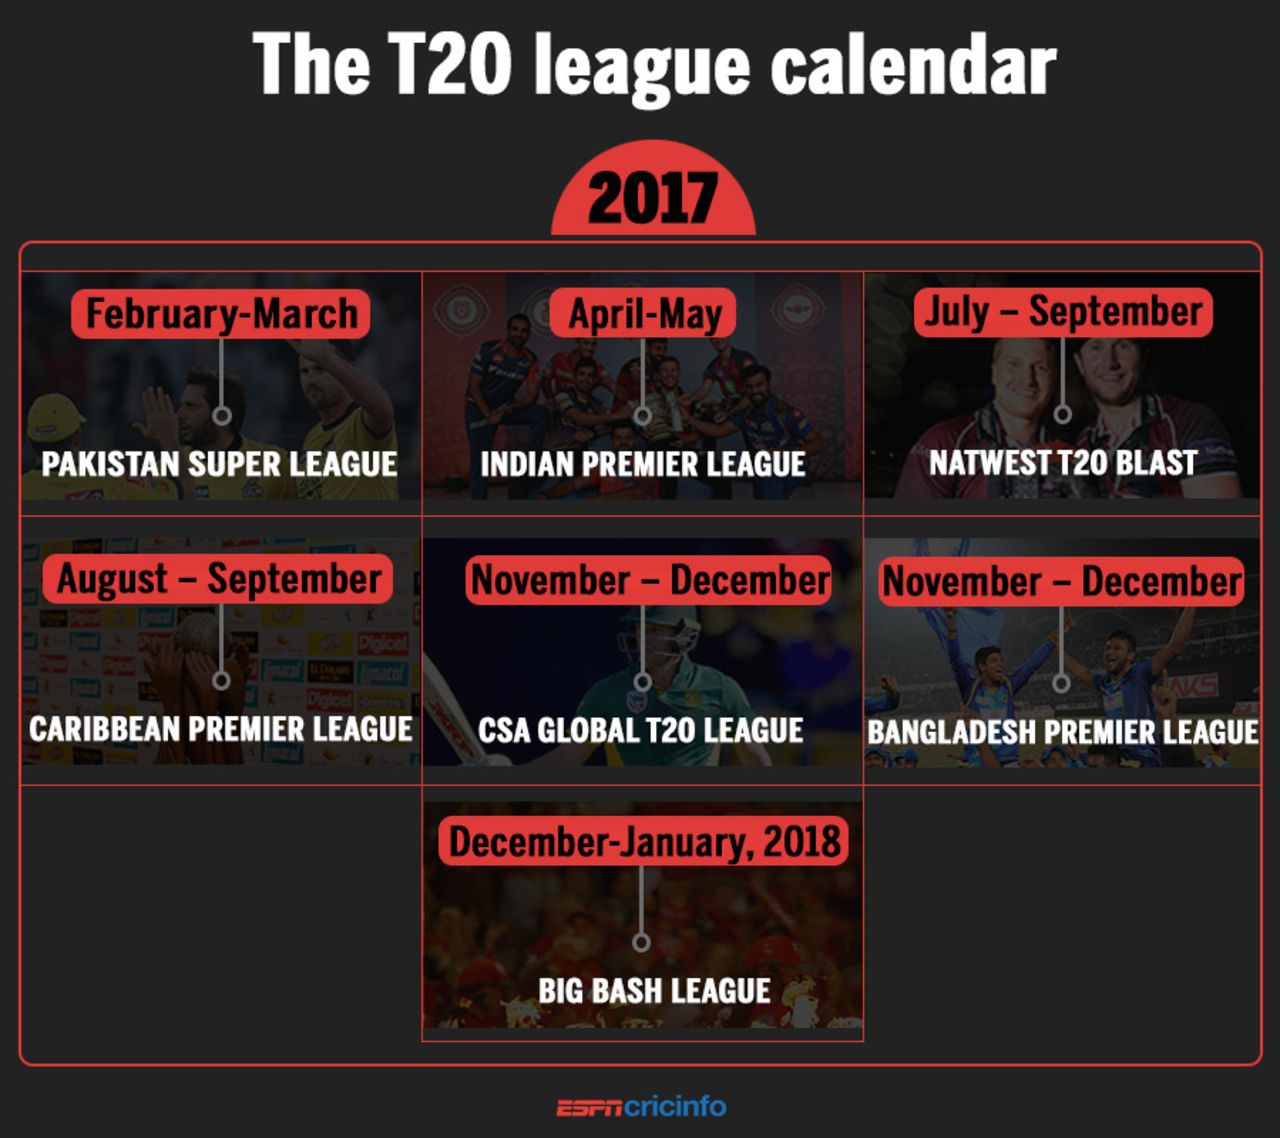 There are big Twenty20 leagues in almost every month of 2017 